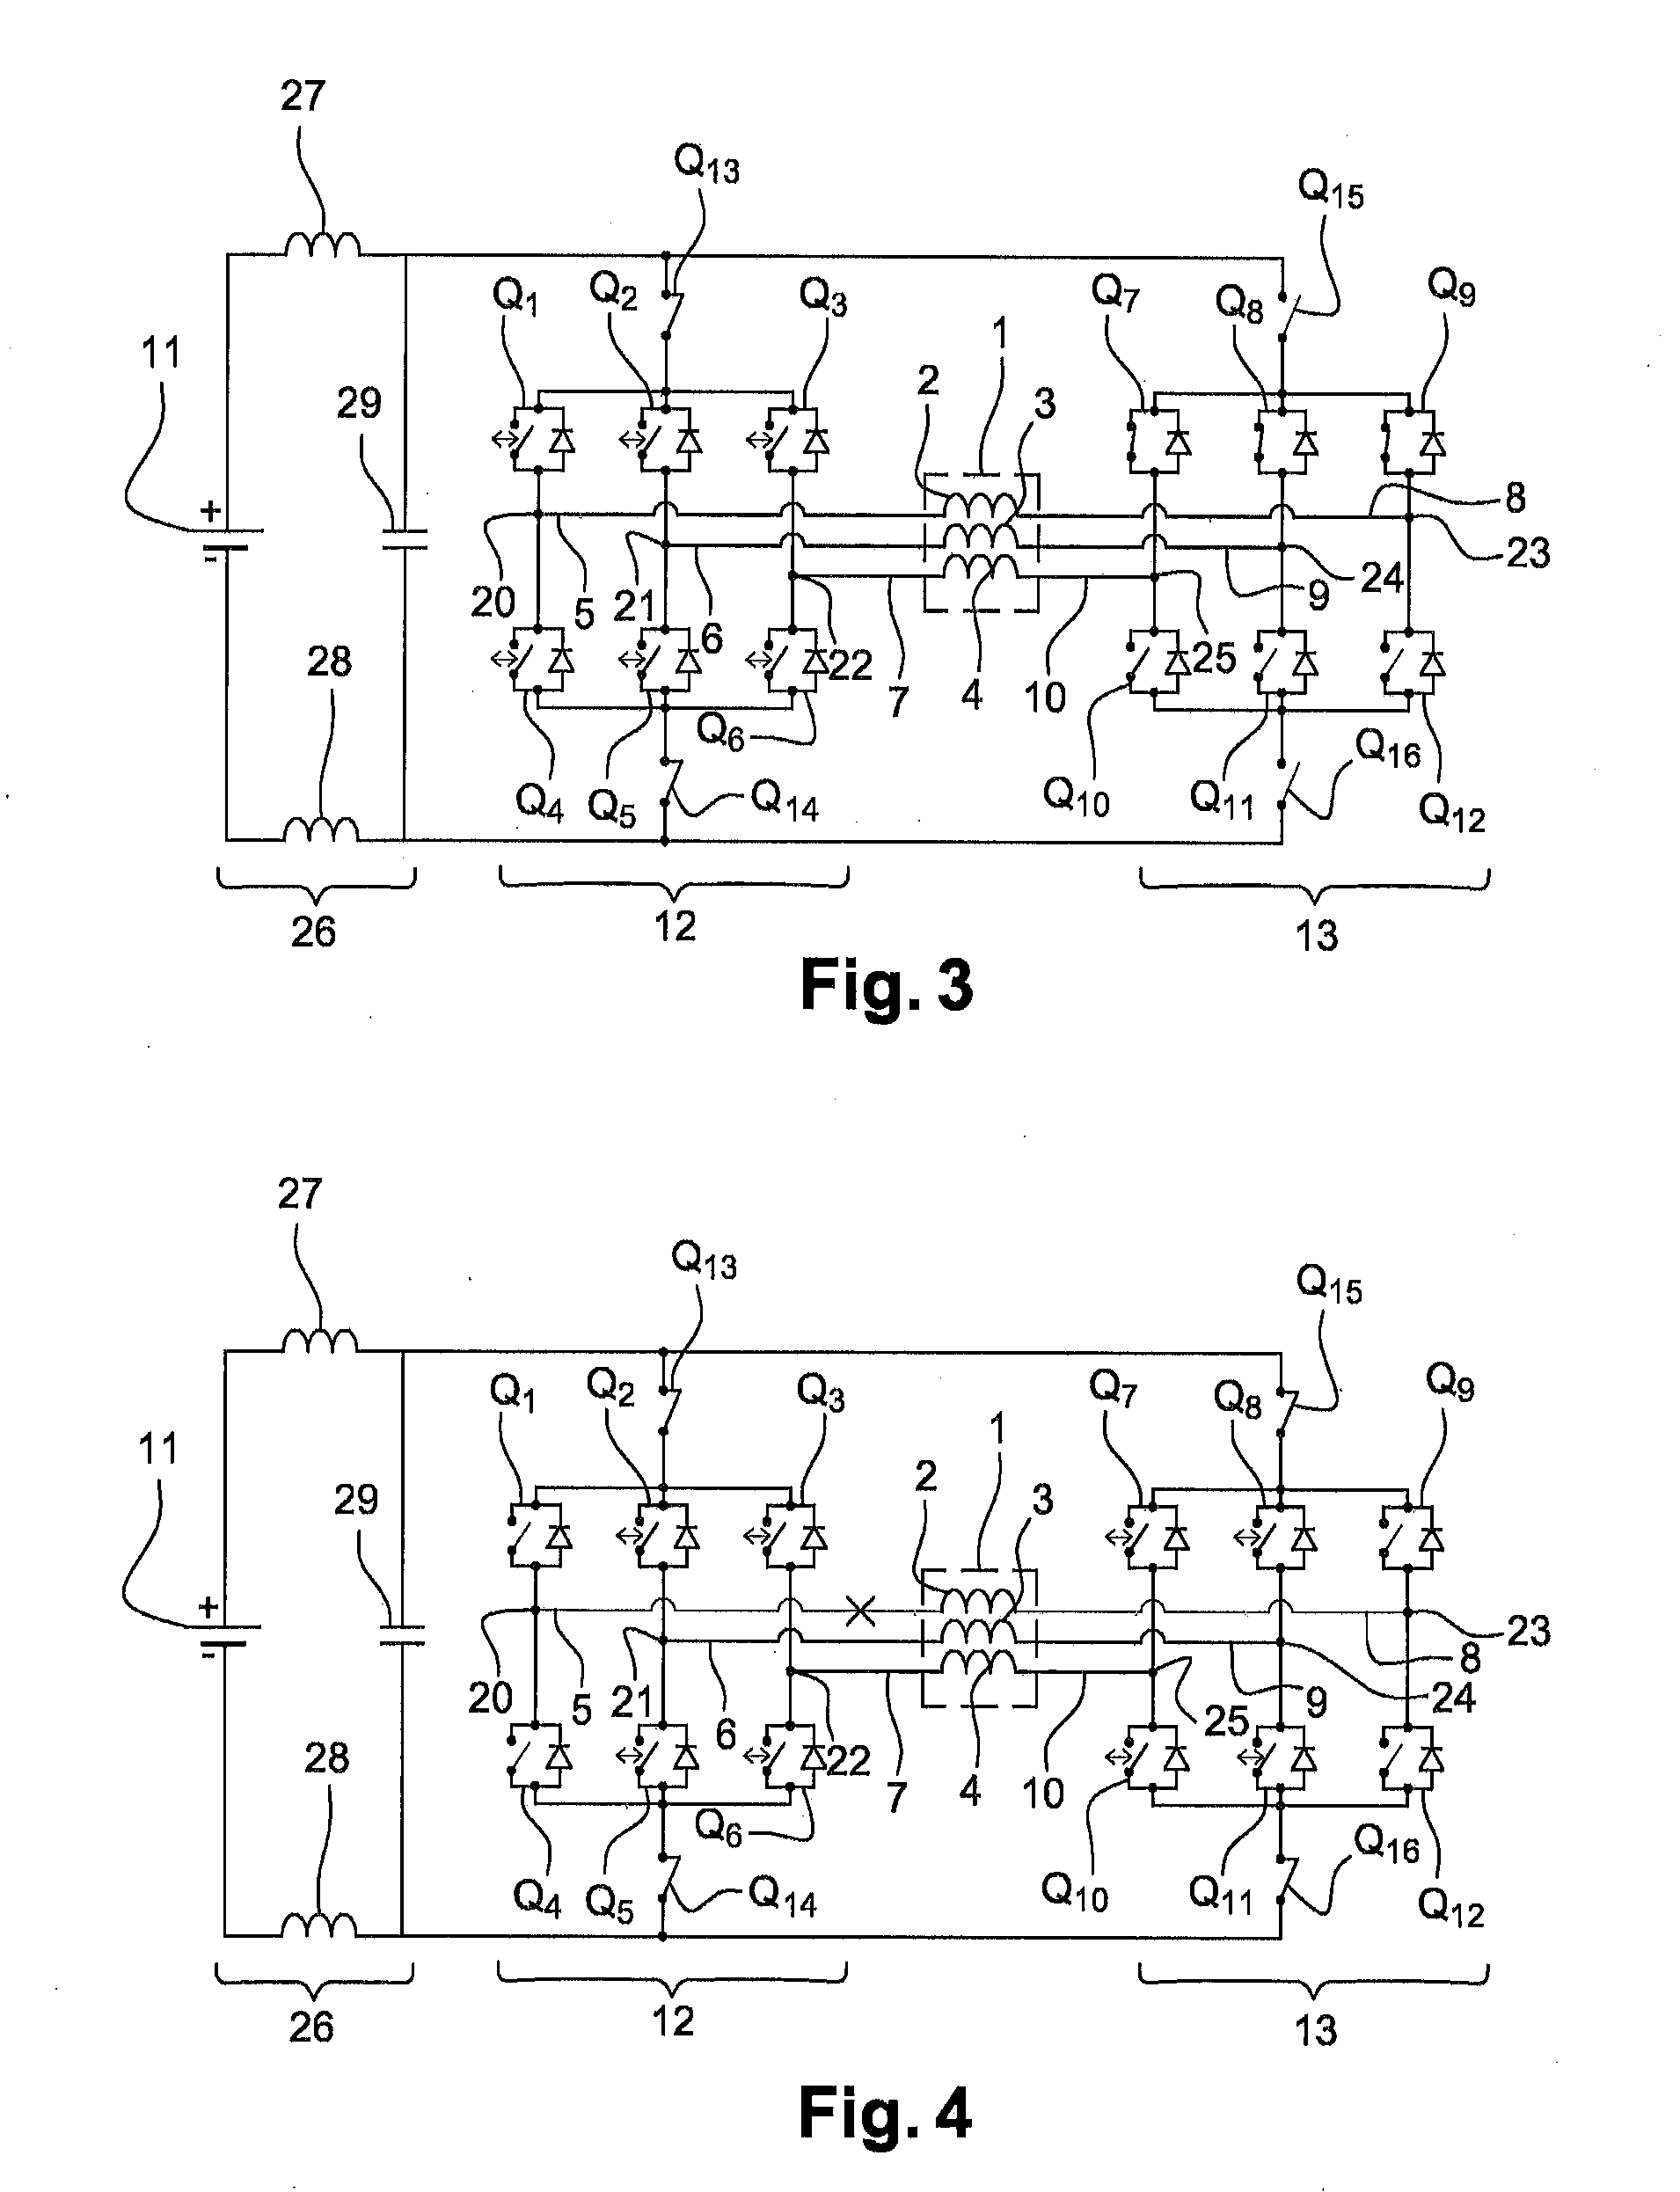 Voltage inverter and method of controlling such an inverter